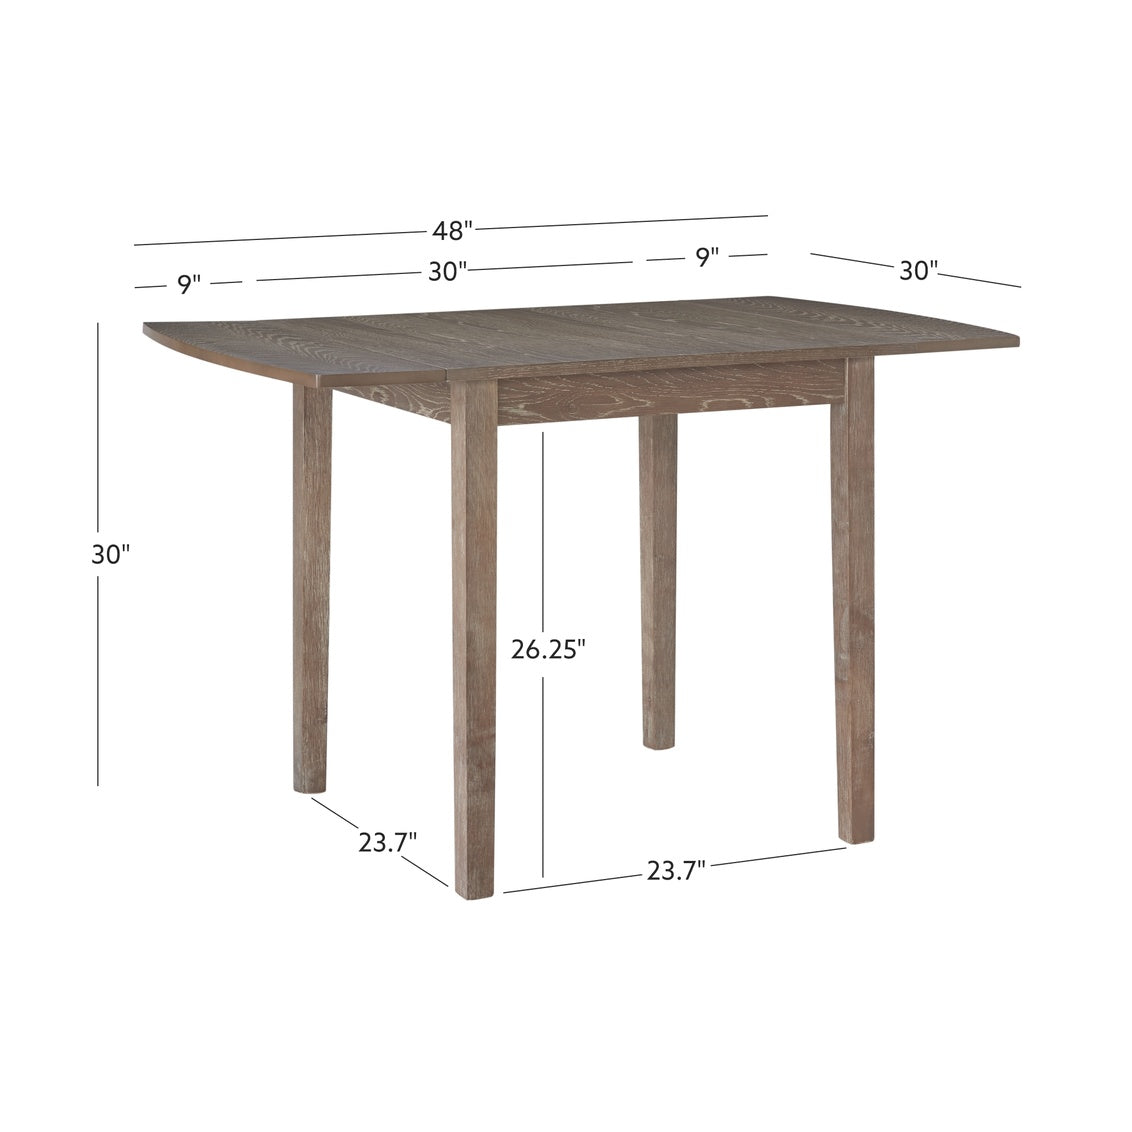 Torino Gray Square Drop Leaf Dining Table